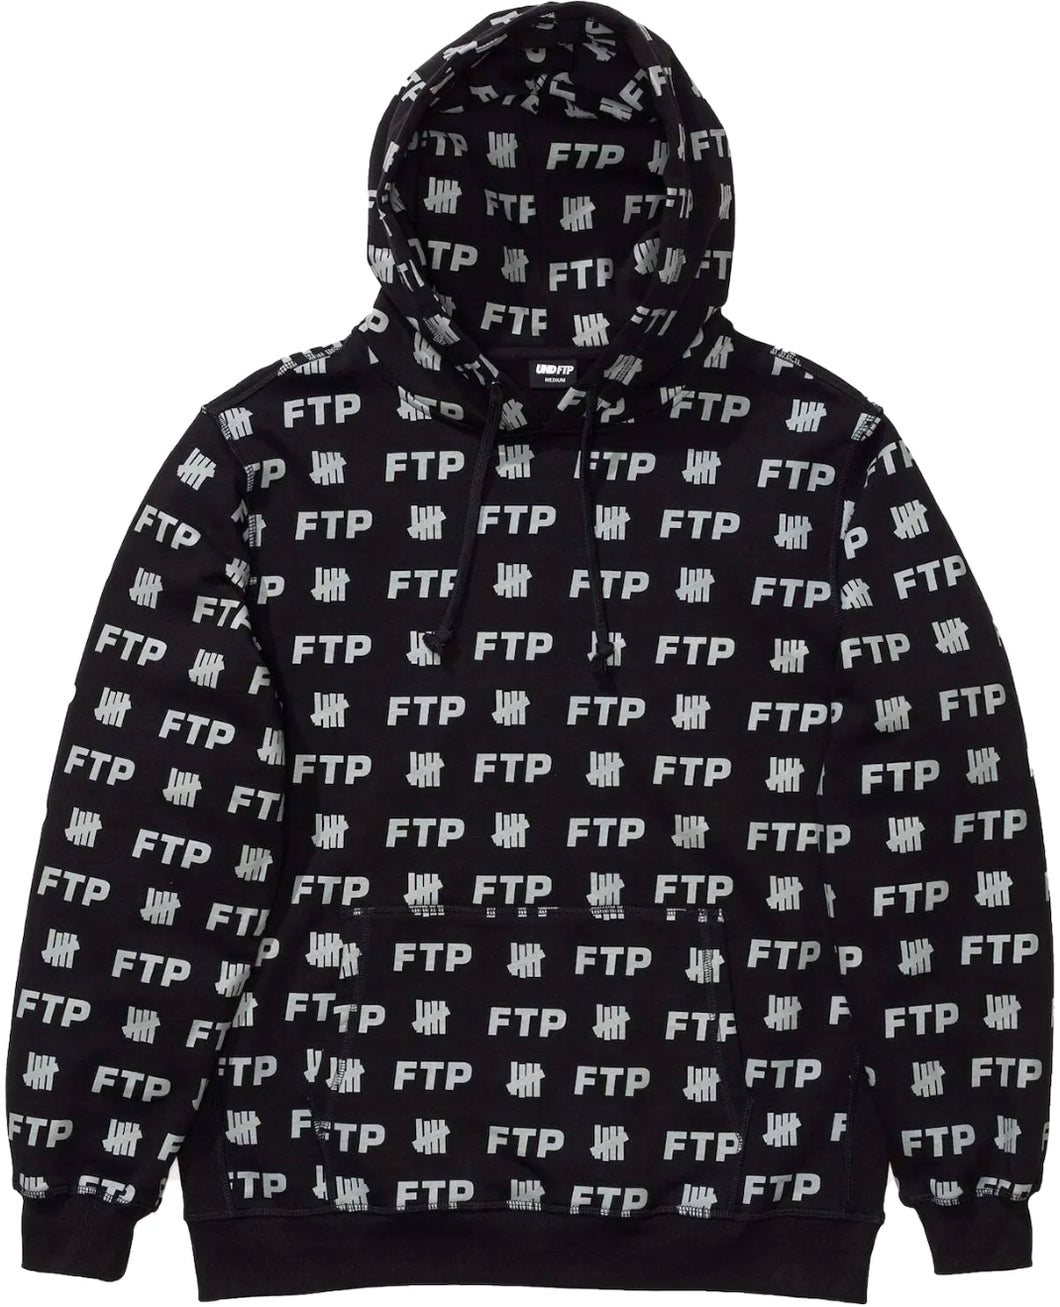 FTP x Undefeated “All Over Hoodie”